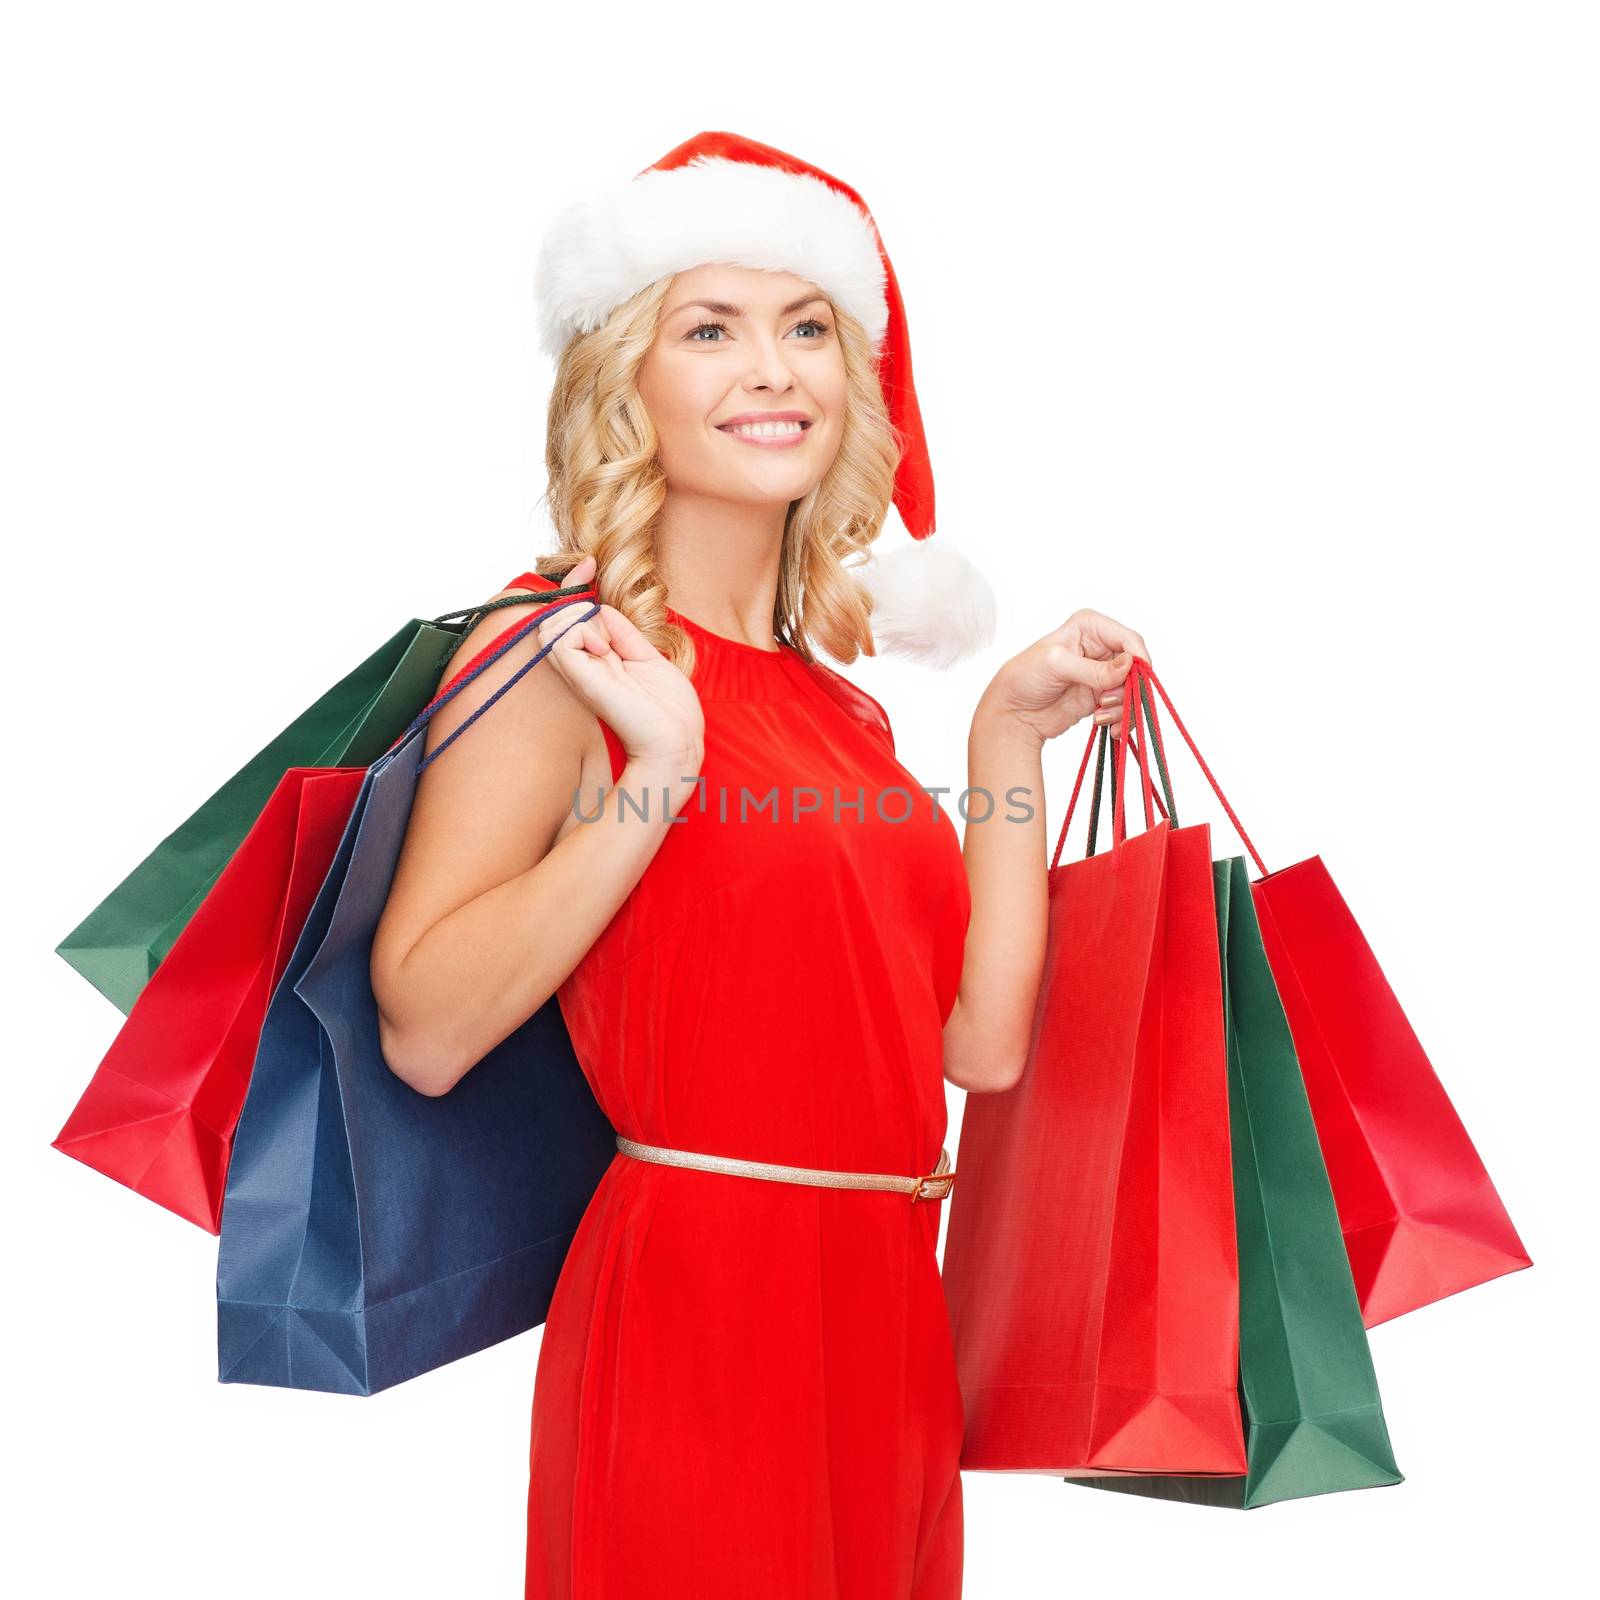 woman in red dress with shopping bags by dolgachov